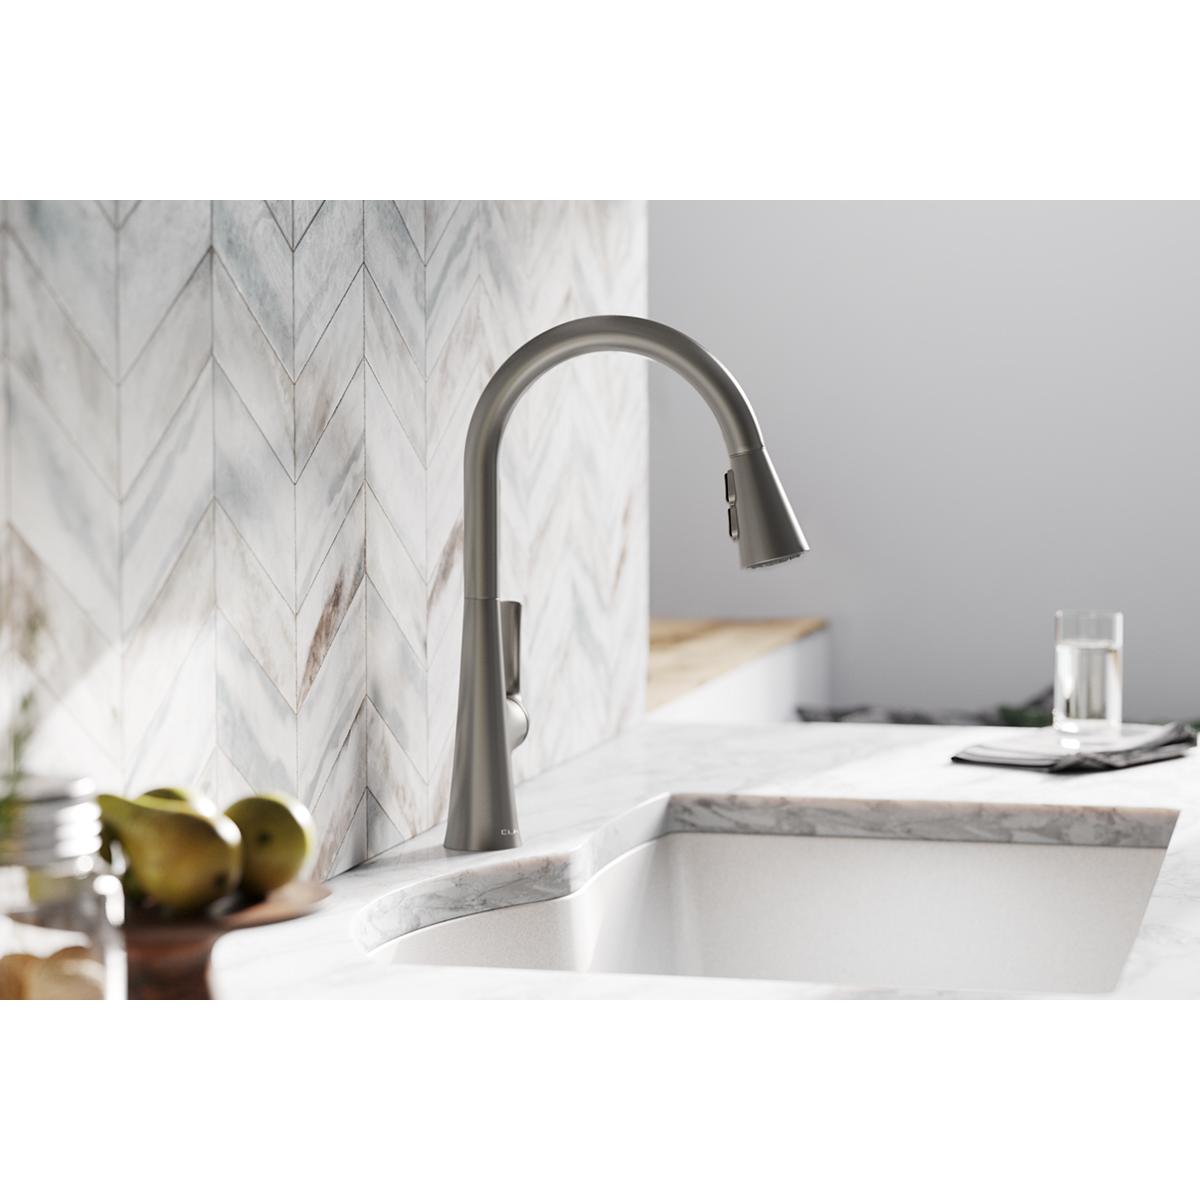 Elkay Harmony Single Hole Kitchen Faucet with Pull-down Spray and Forward Only Lever Handle